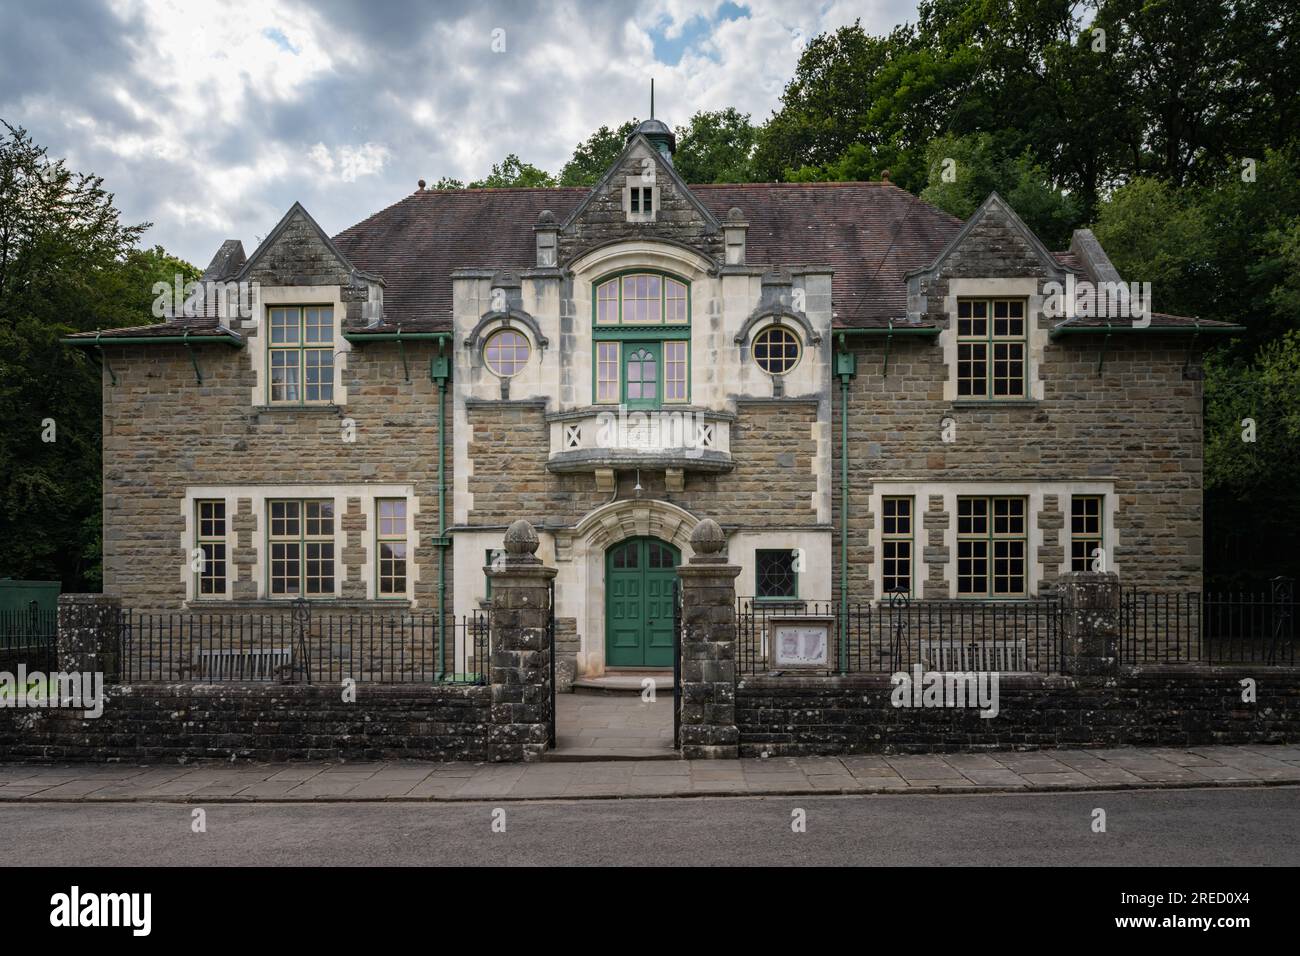 Oakdale Womenss' Institute, St. Fagans National Museum of History, Cardiff, pays de Galles, Royaume-Uni Banque D'Images